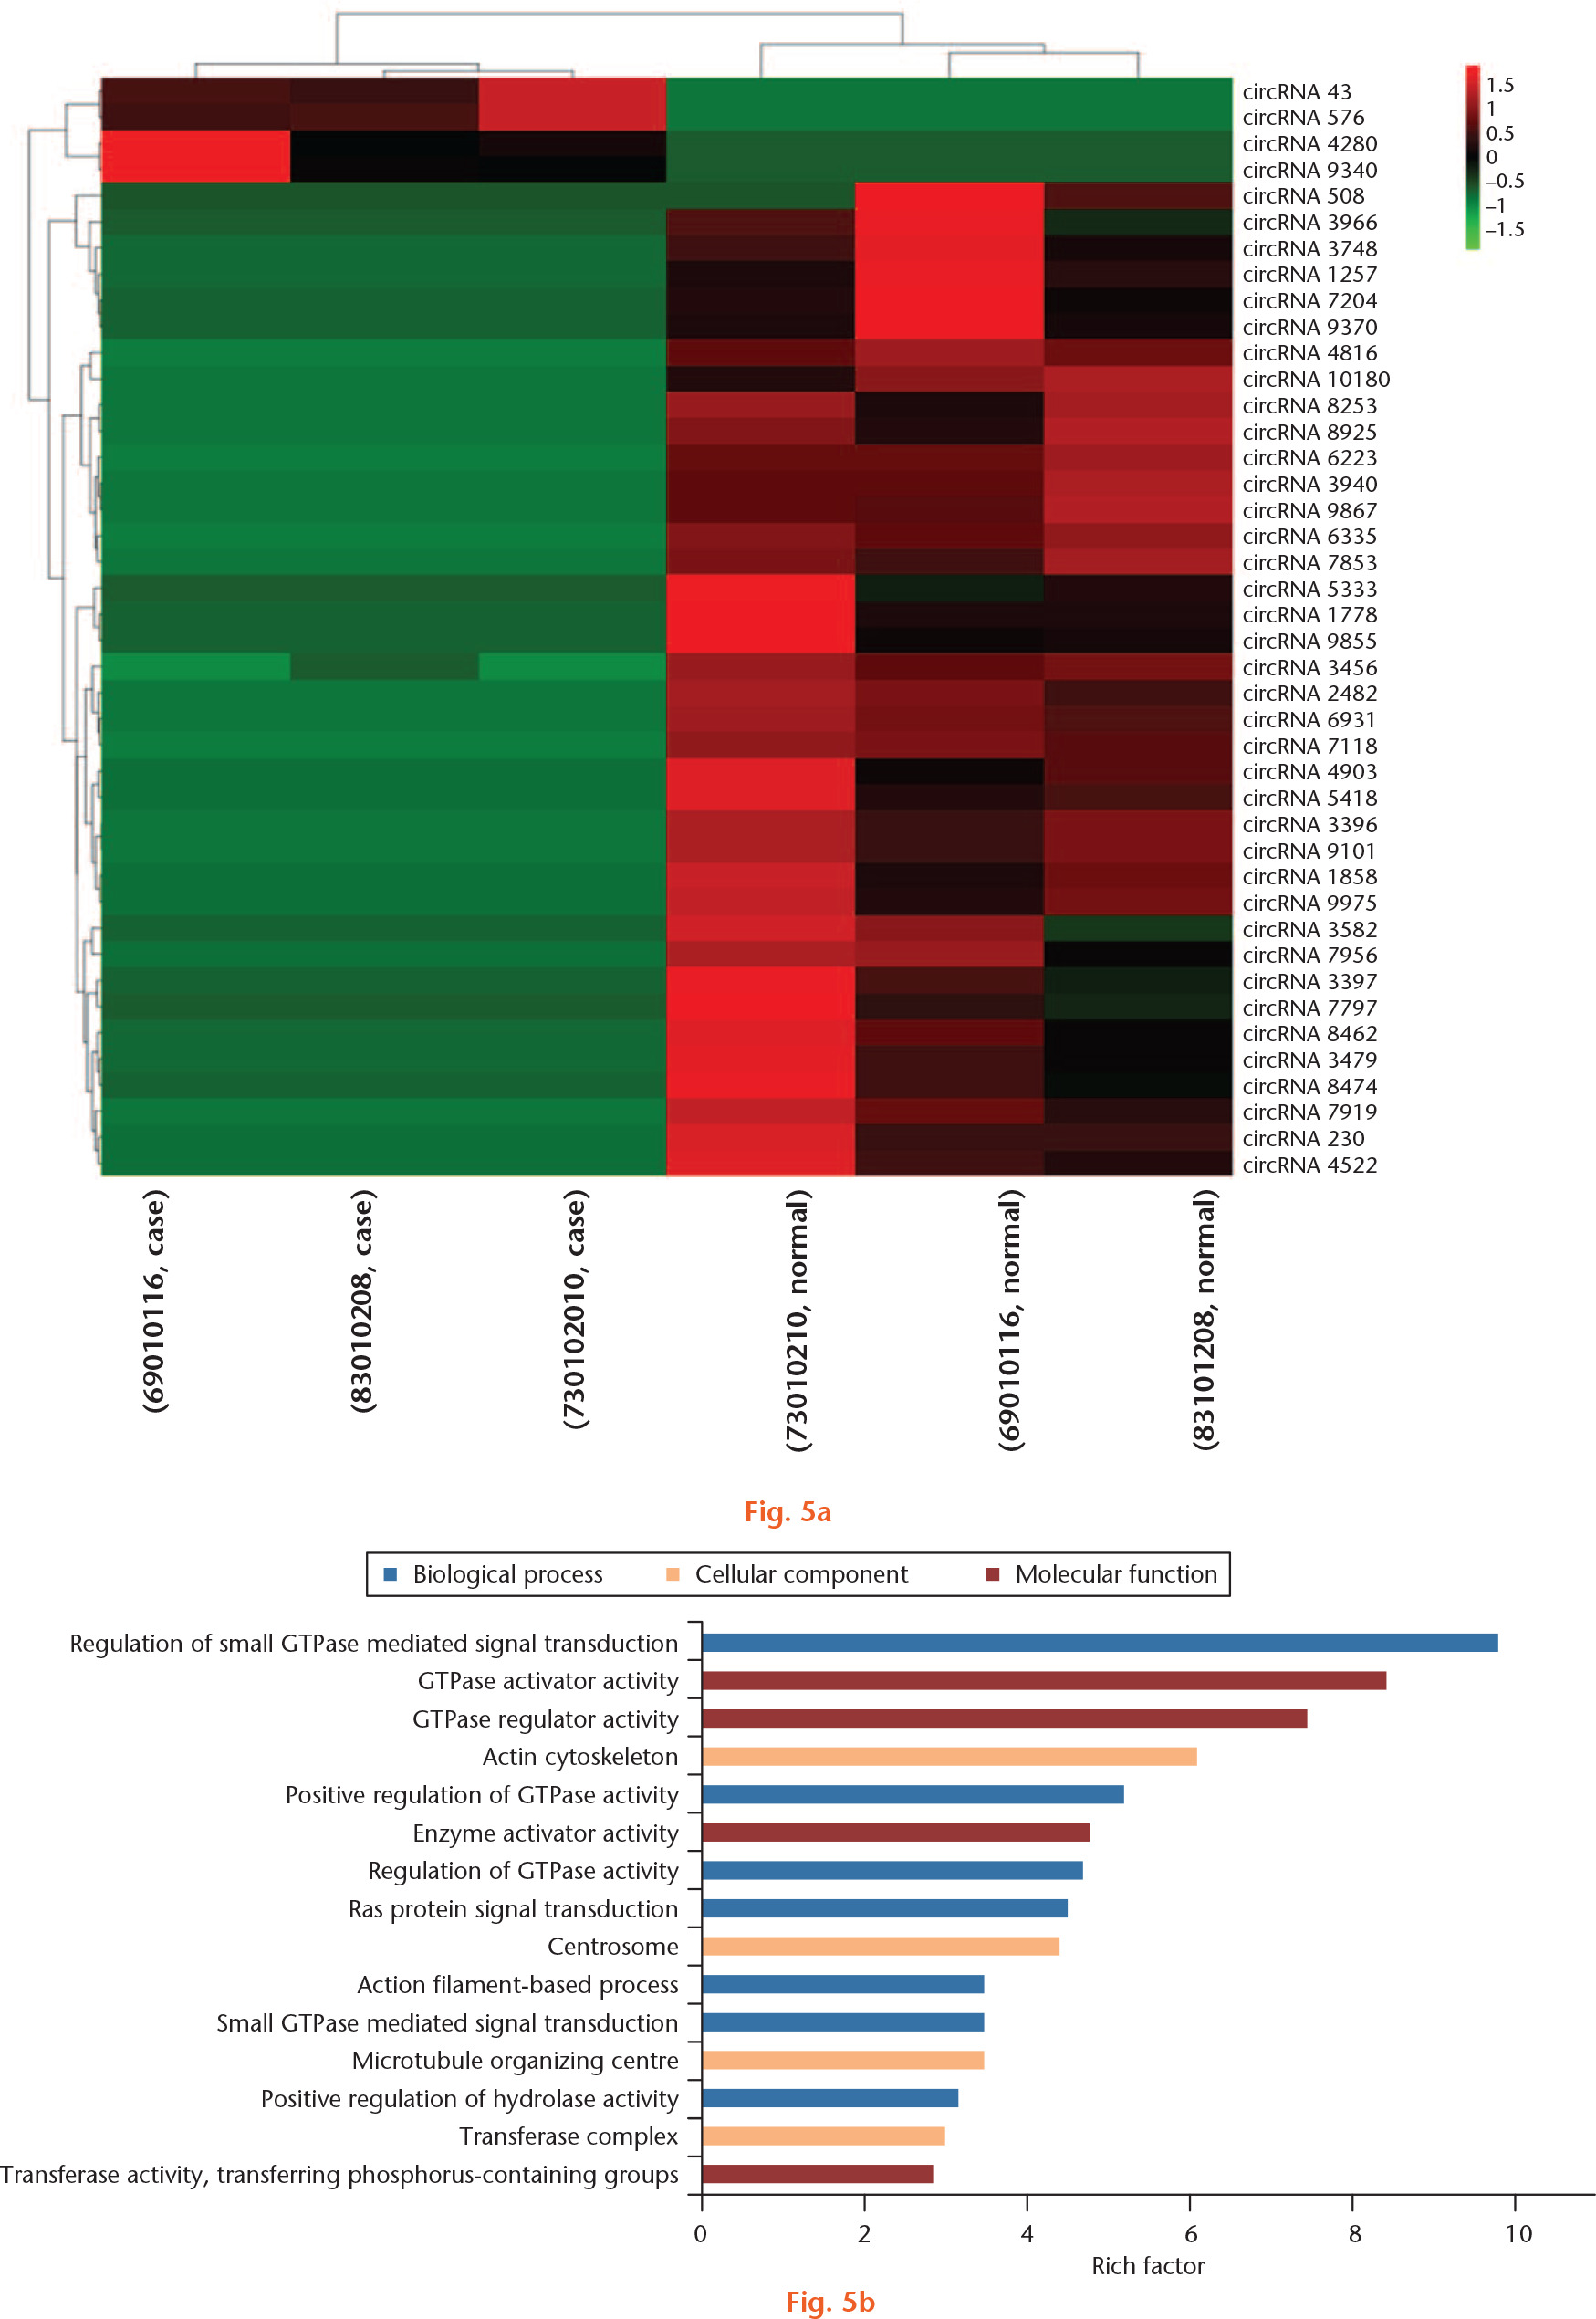 Fig. 5 
            Differentially expressed circRNAs (DECs) in whole-transcriptome sequencing of osteoarthritic (OA) and normal tissue of knee articular cartilage and gene ontology (GO) analysis of their parental genes. a) DECs in whole-transcriptome sequencing of OA and normal tissue of knee articular cartilage. Hierarchical clustering shows a difference in circRNA expression profile between the two groups and homogeneity within groups. b) GO analysis for parental genes of DECs. The top 15 highest enriched GO terms in three domains were demonstrated.
          